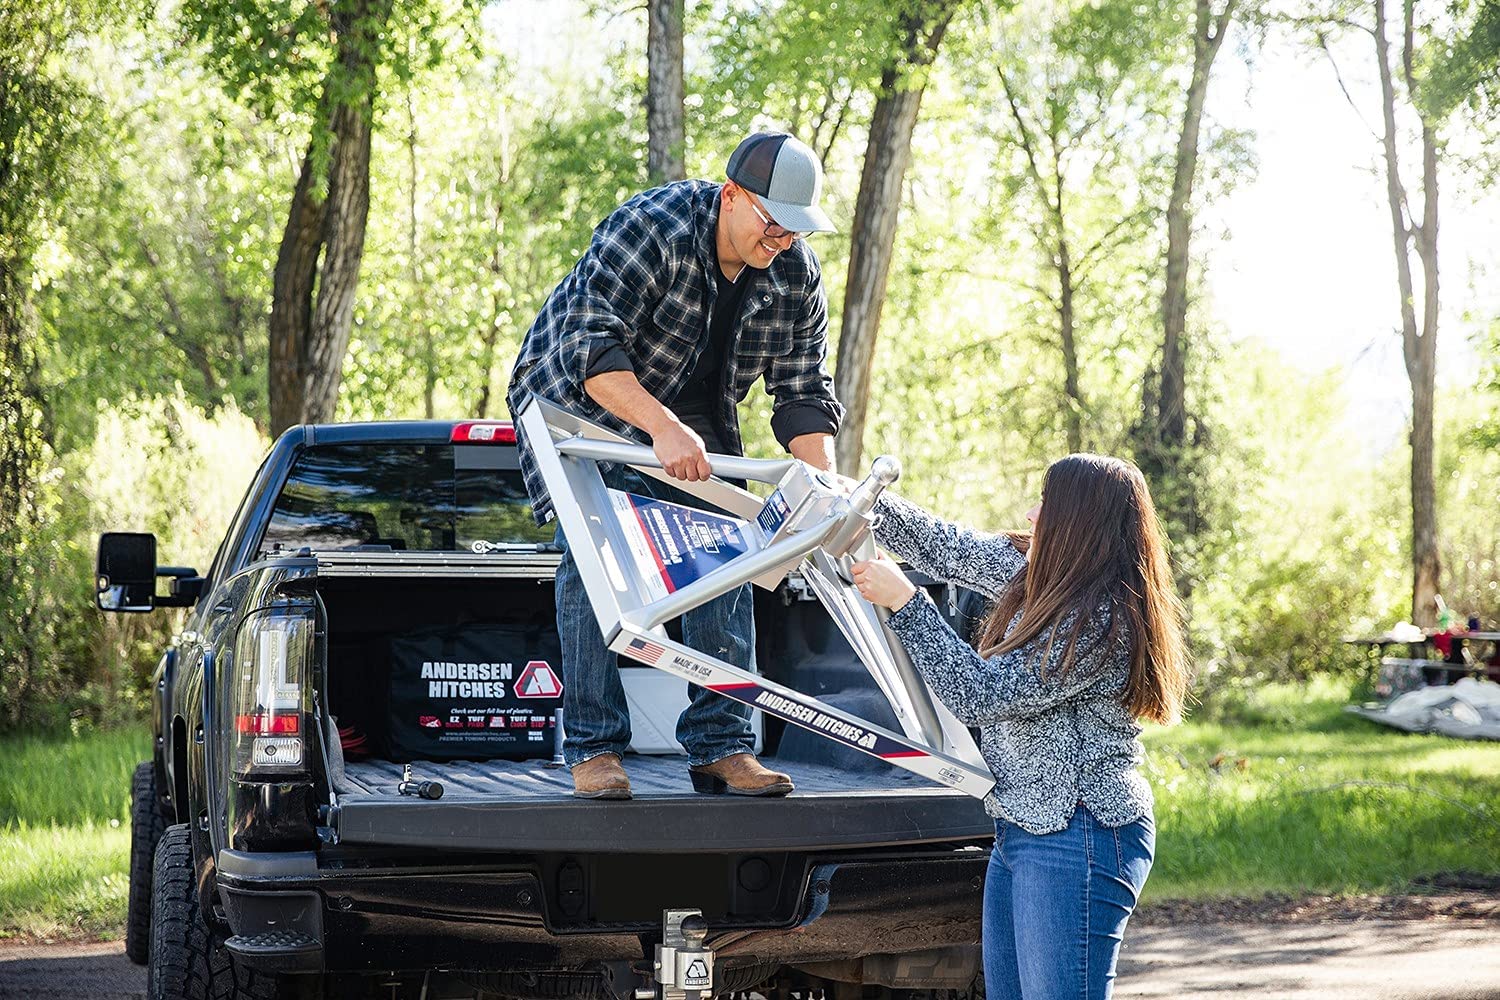 Andersen Hitches Aluminum Ultimate 5th Wheel Connection - Ultimate Connection Gooseneck Mount - ONE Person Install or Removal in Less Than 5 Minutes! AND3220